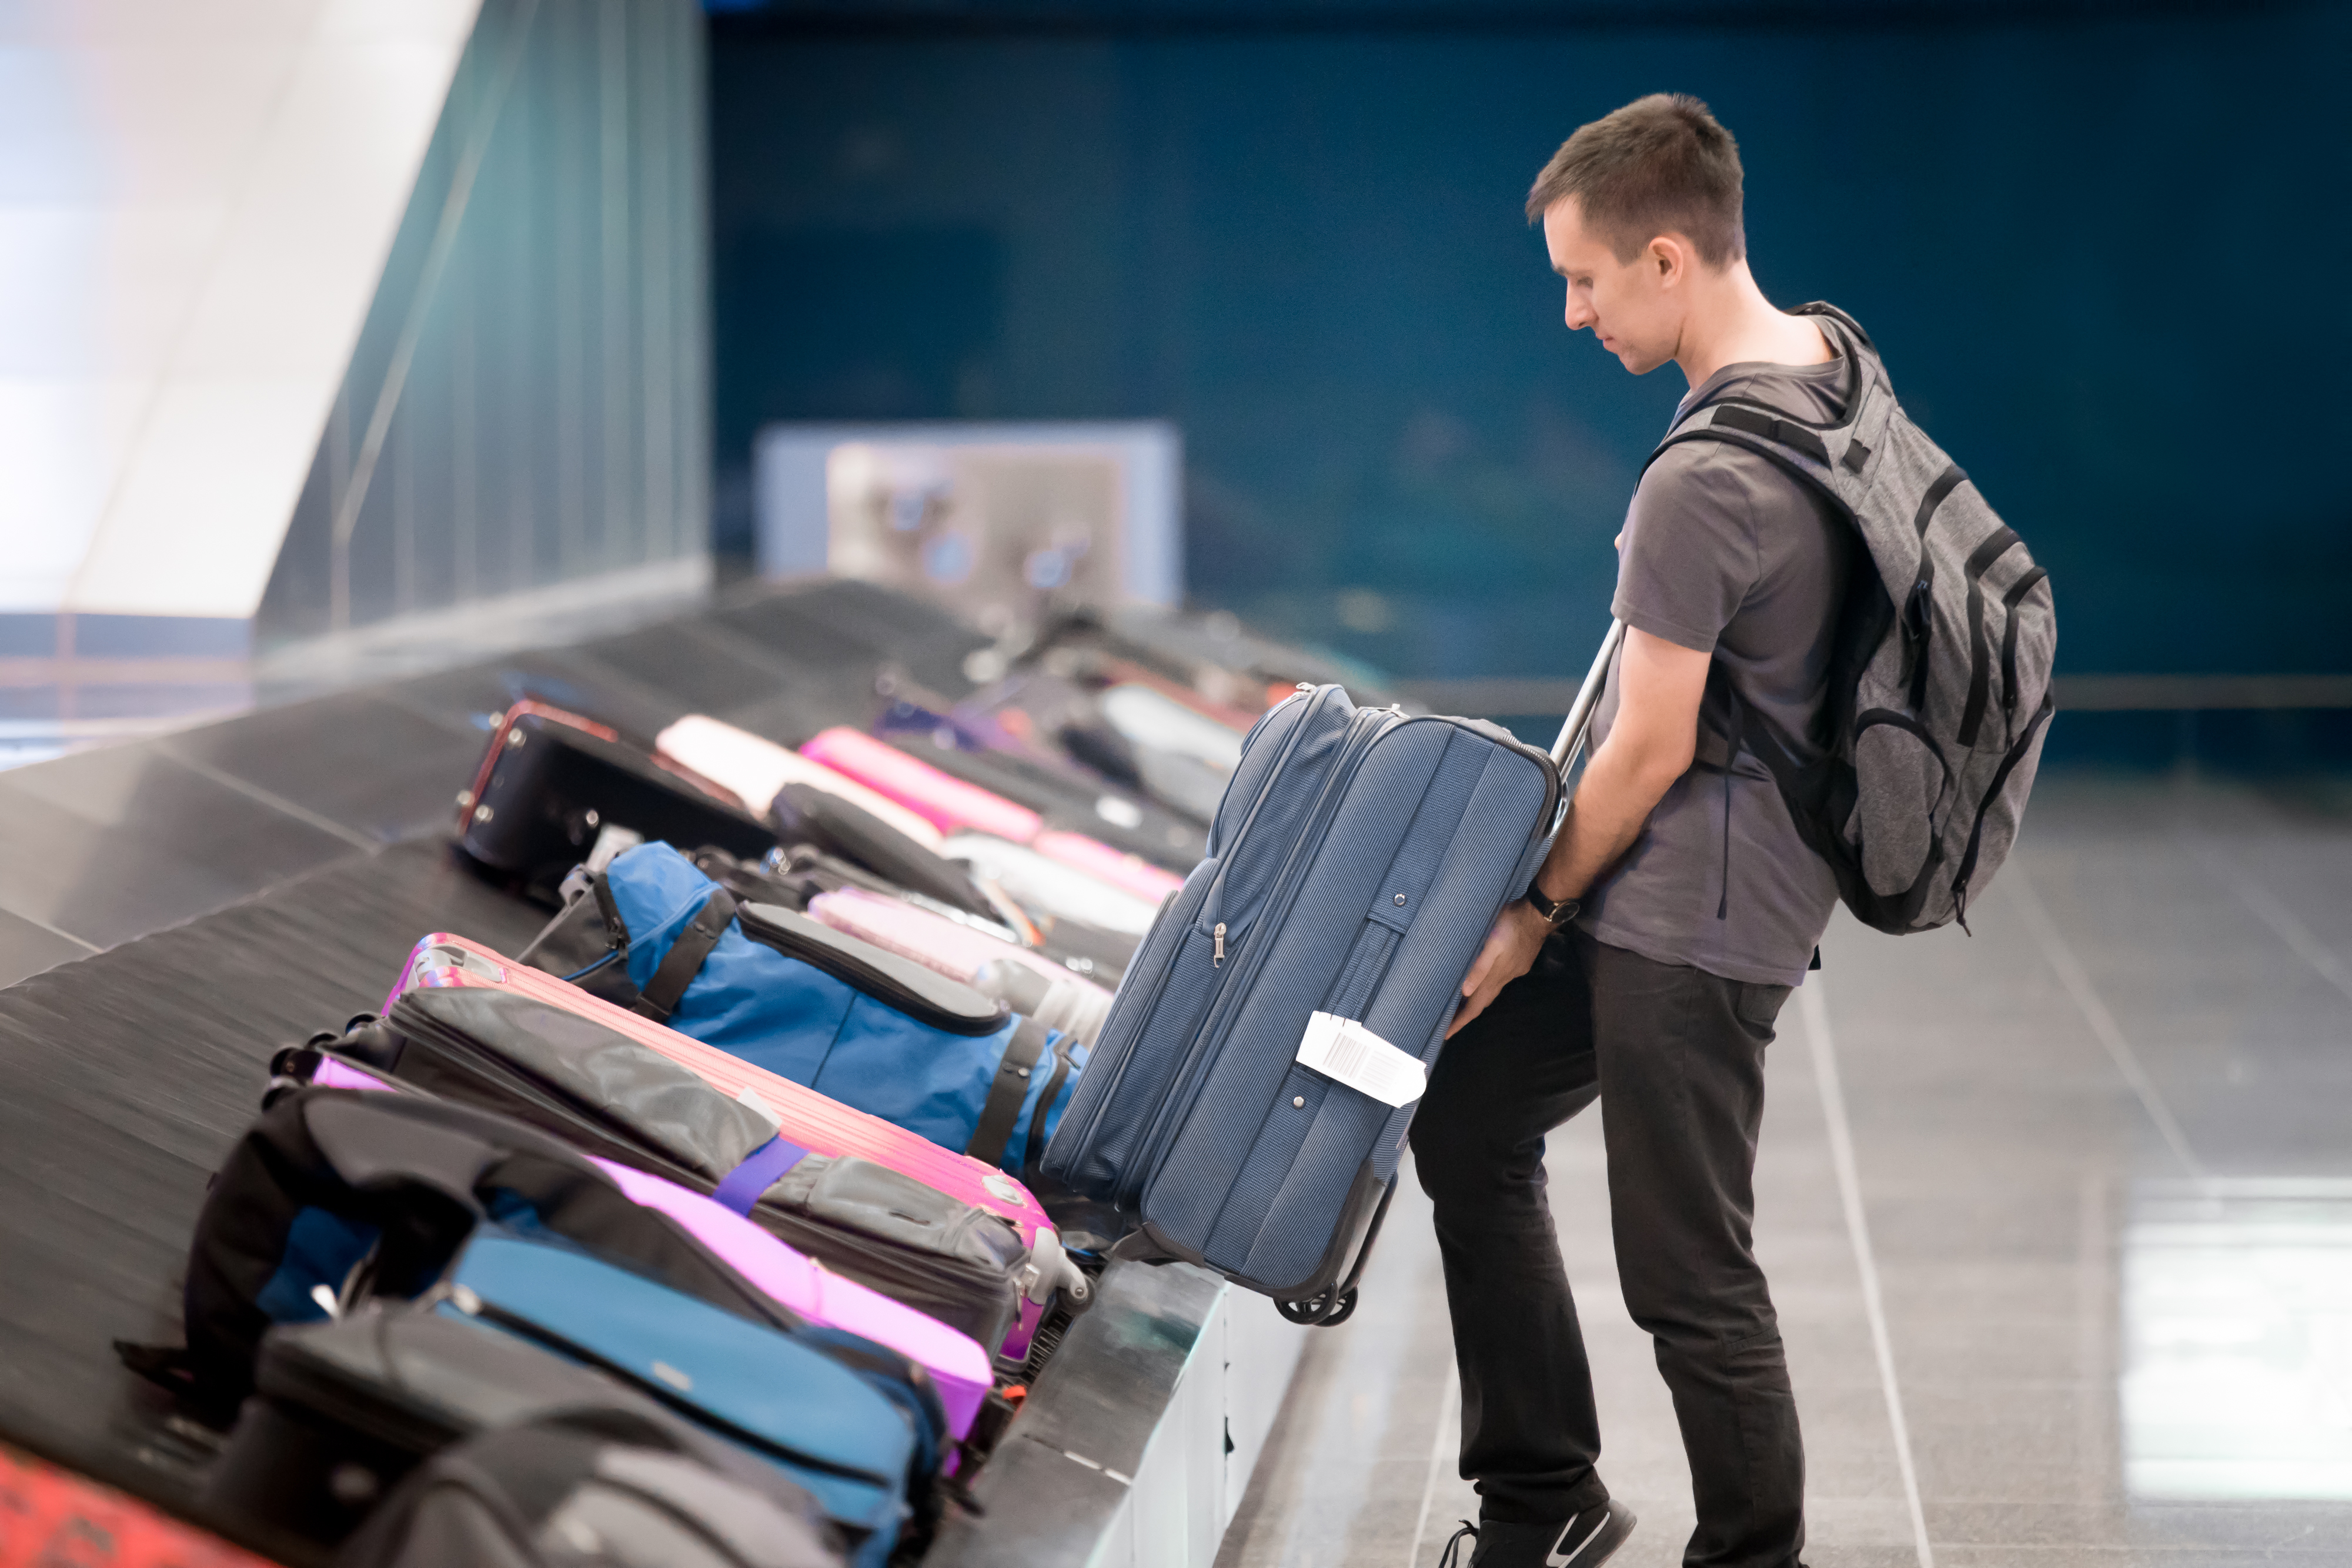 We Bet You Haven't Thought of This Way to Spot Checked Luggage